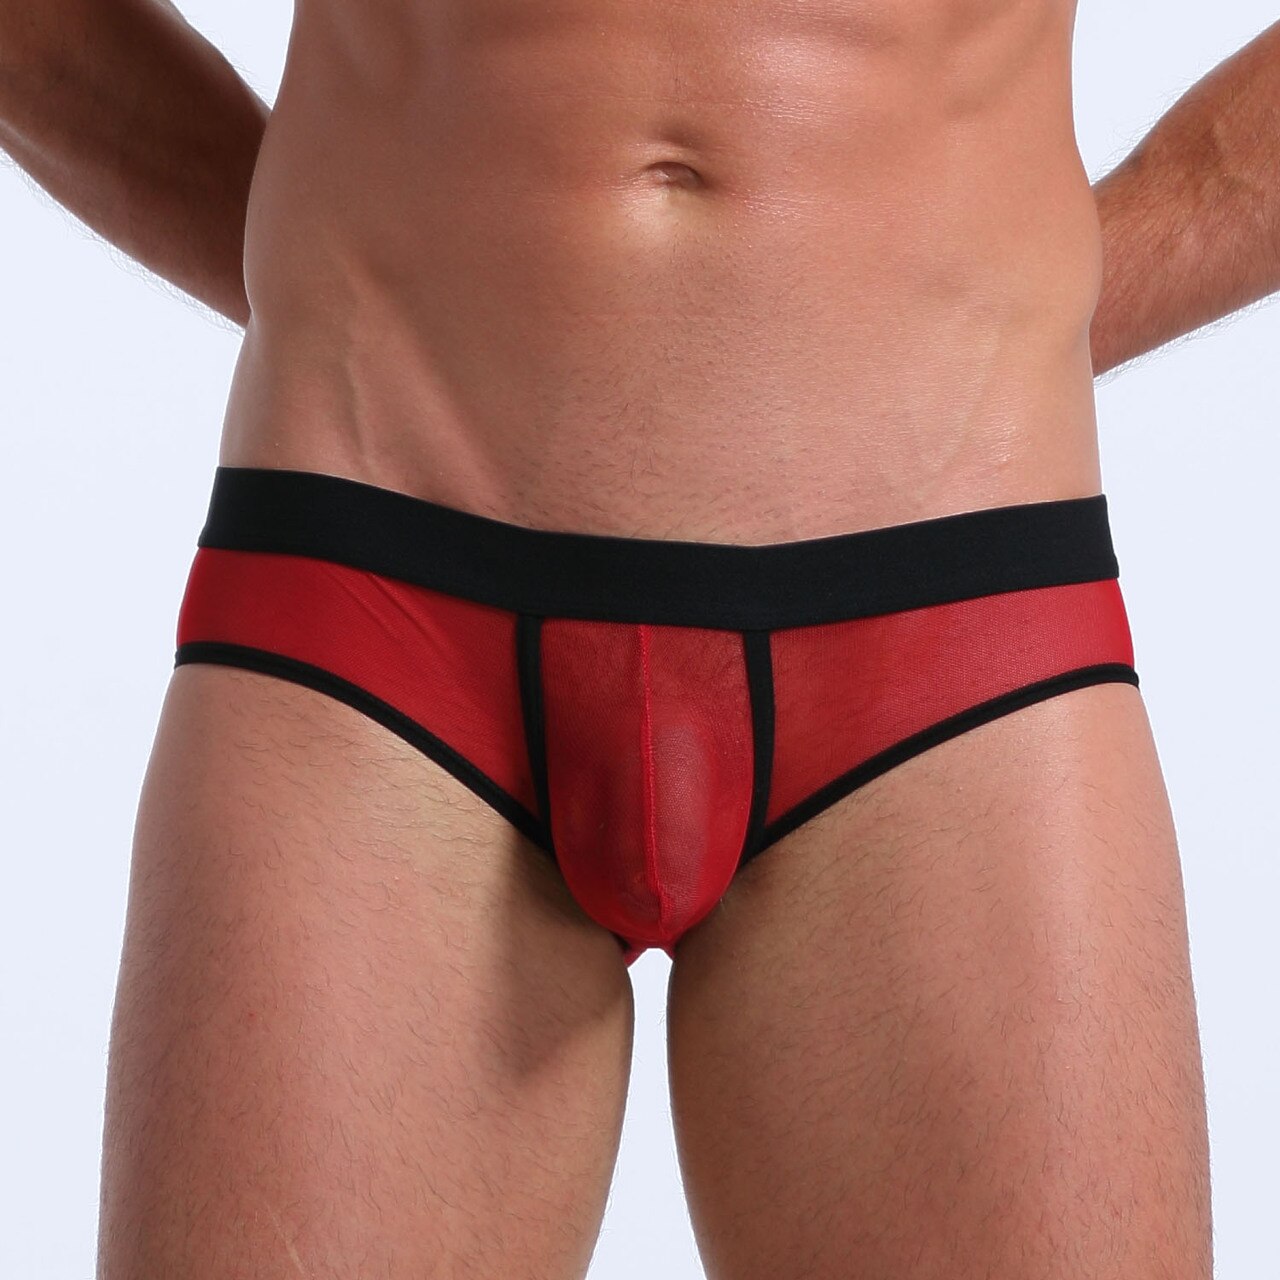 SALE - Mens Stretch Mesh Sheer Briefs with Pouch Front Red